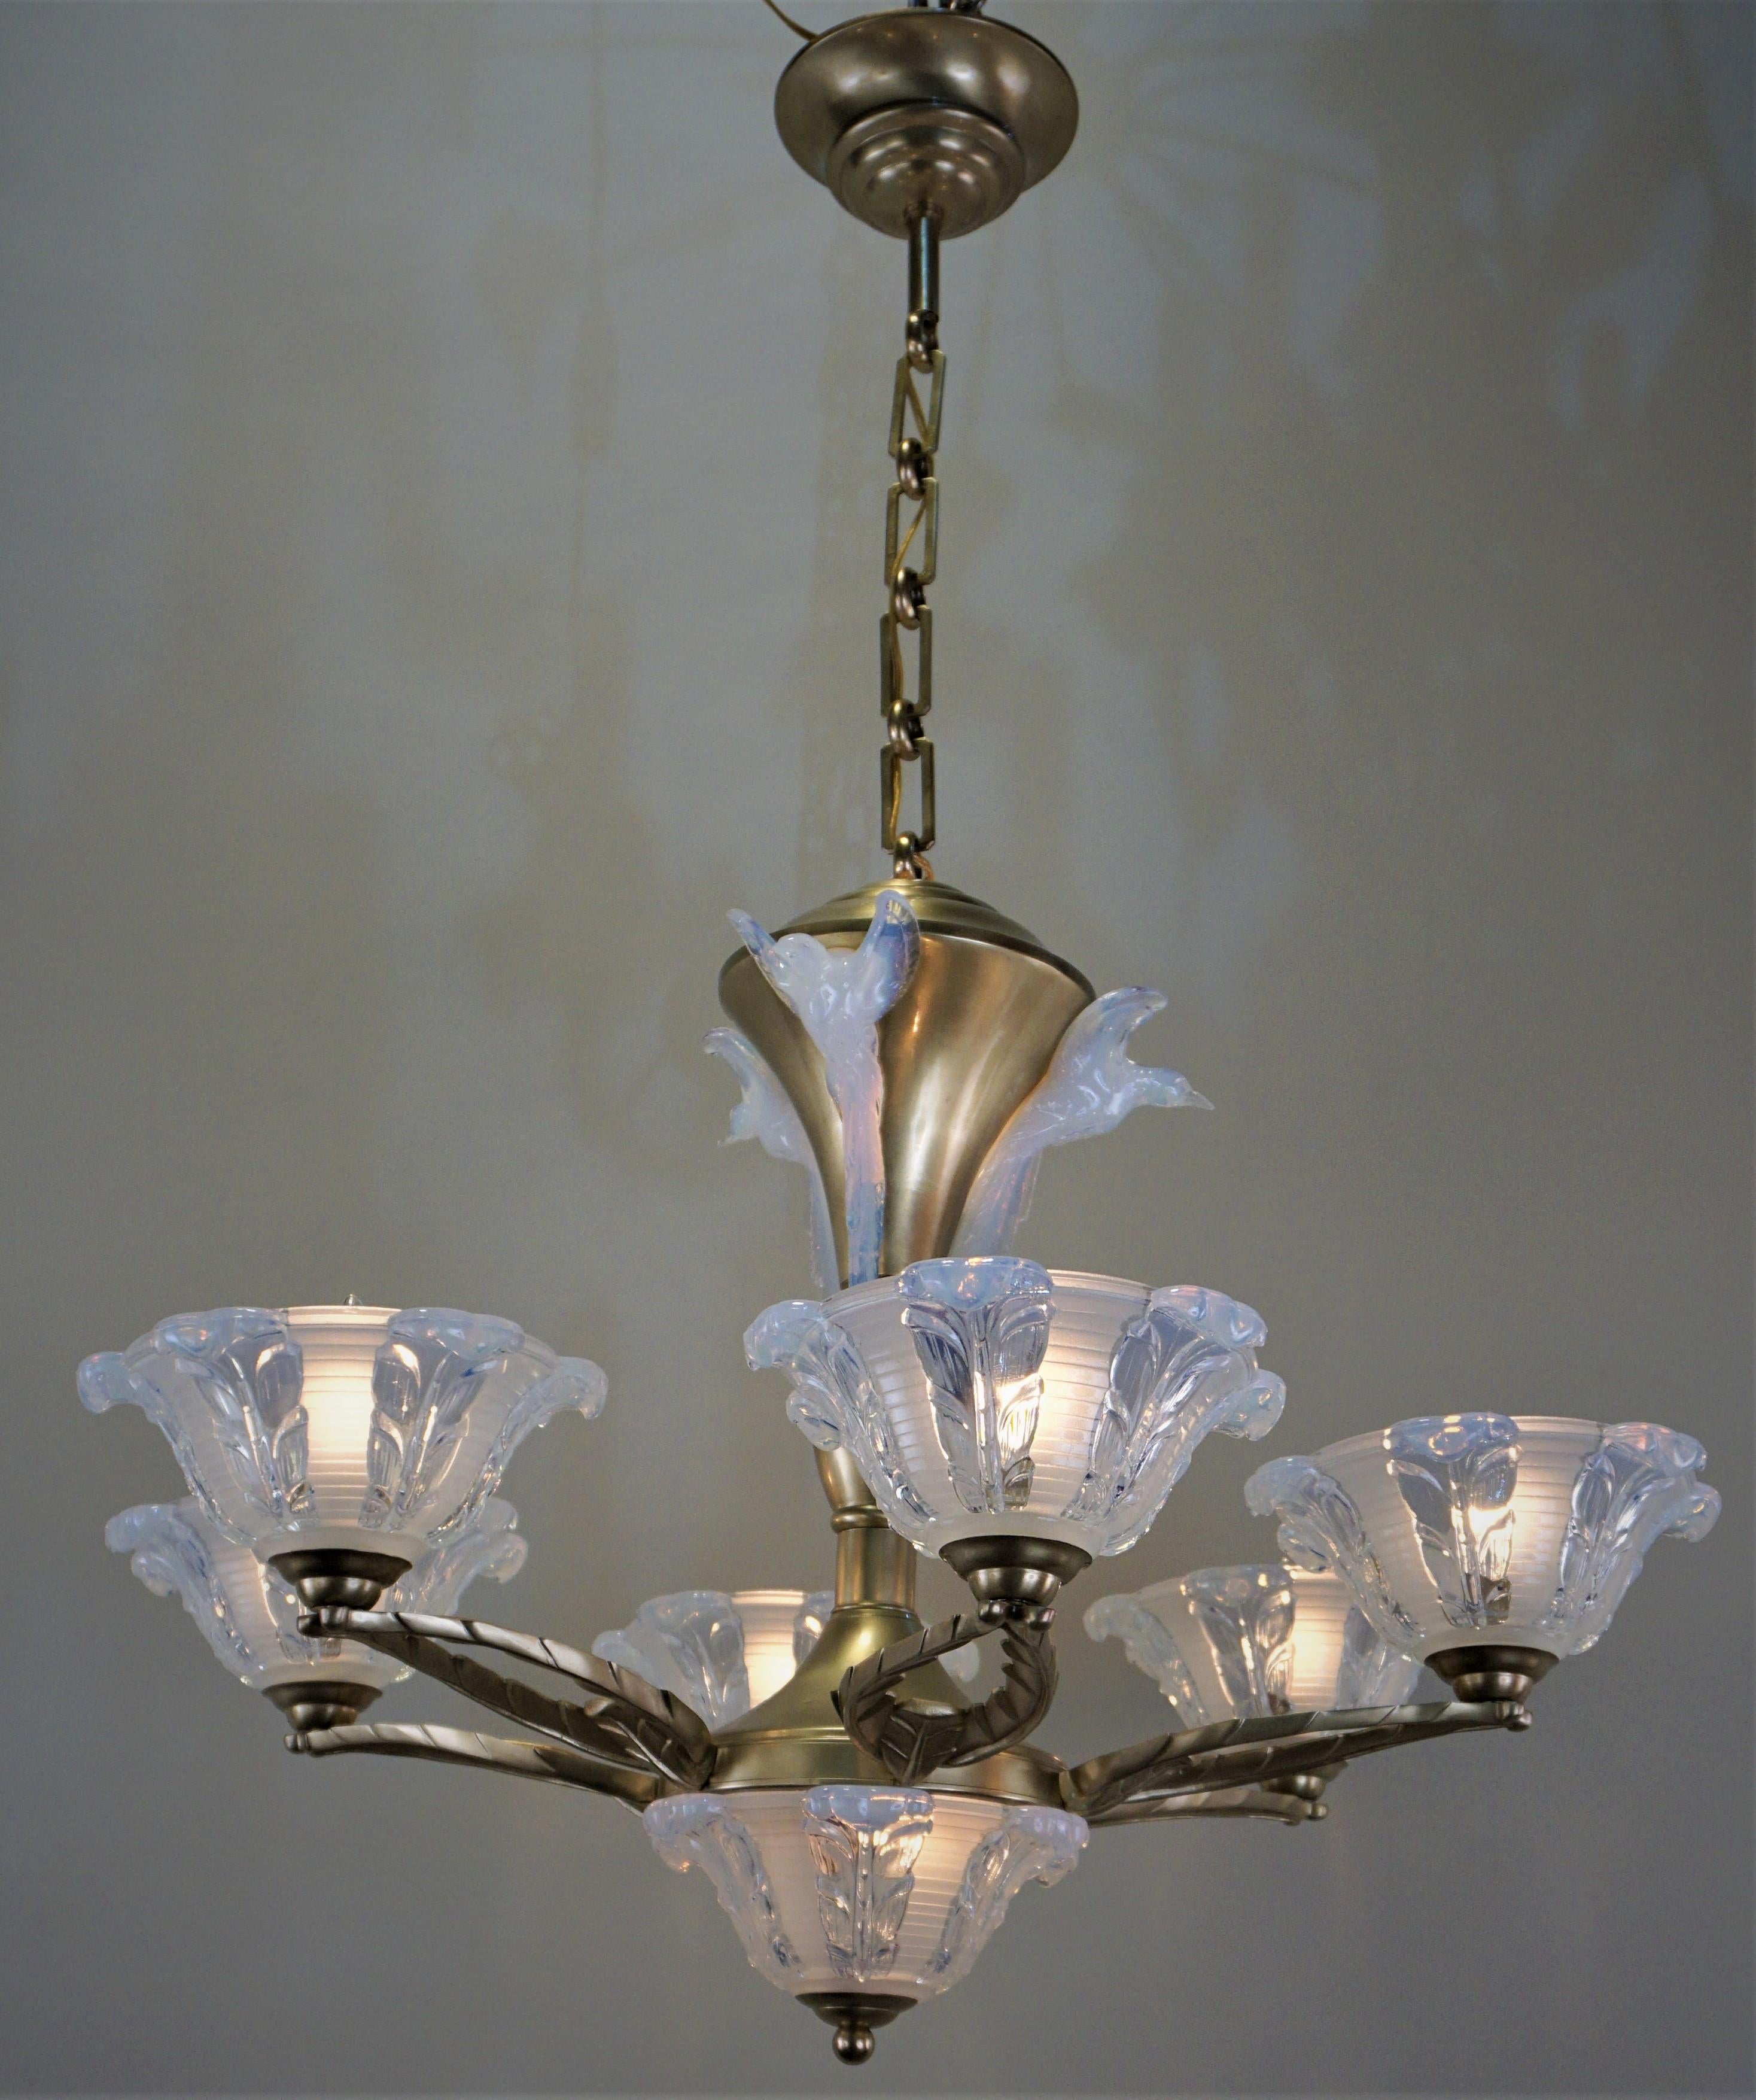 Early 20th Century French Art Deco Chandelier with Opalescent Glass Shades by Ezan & Petitot